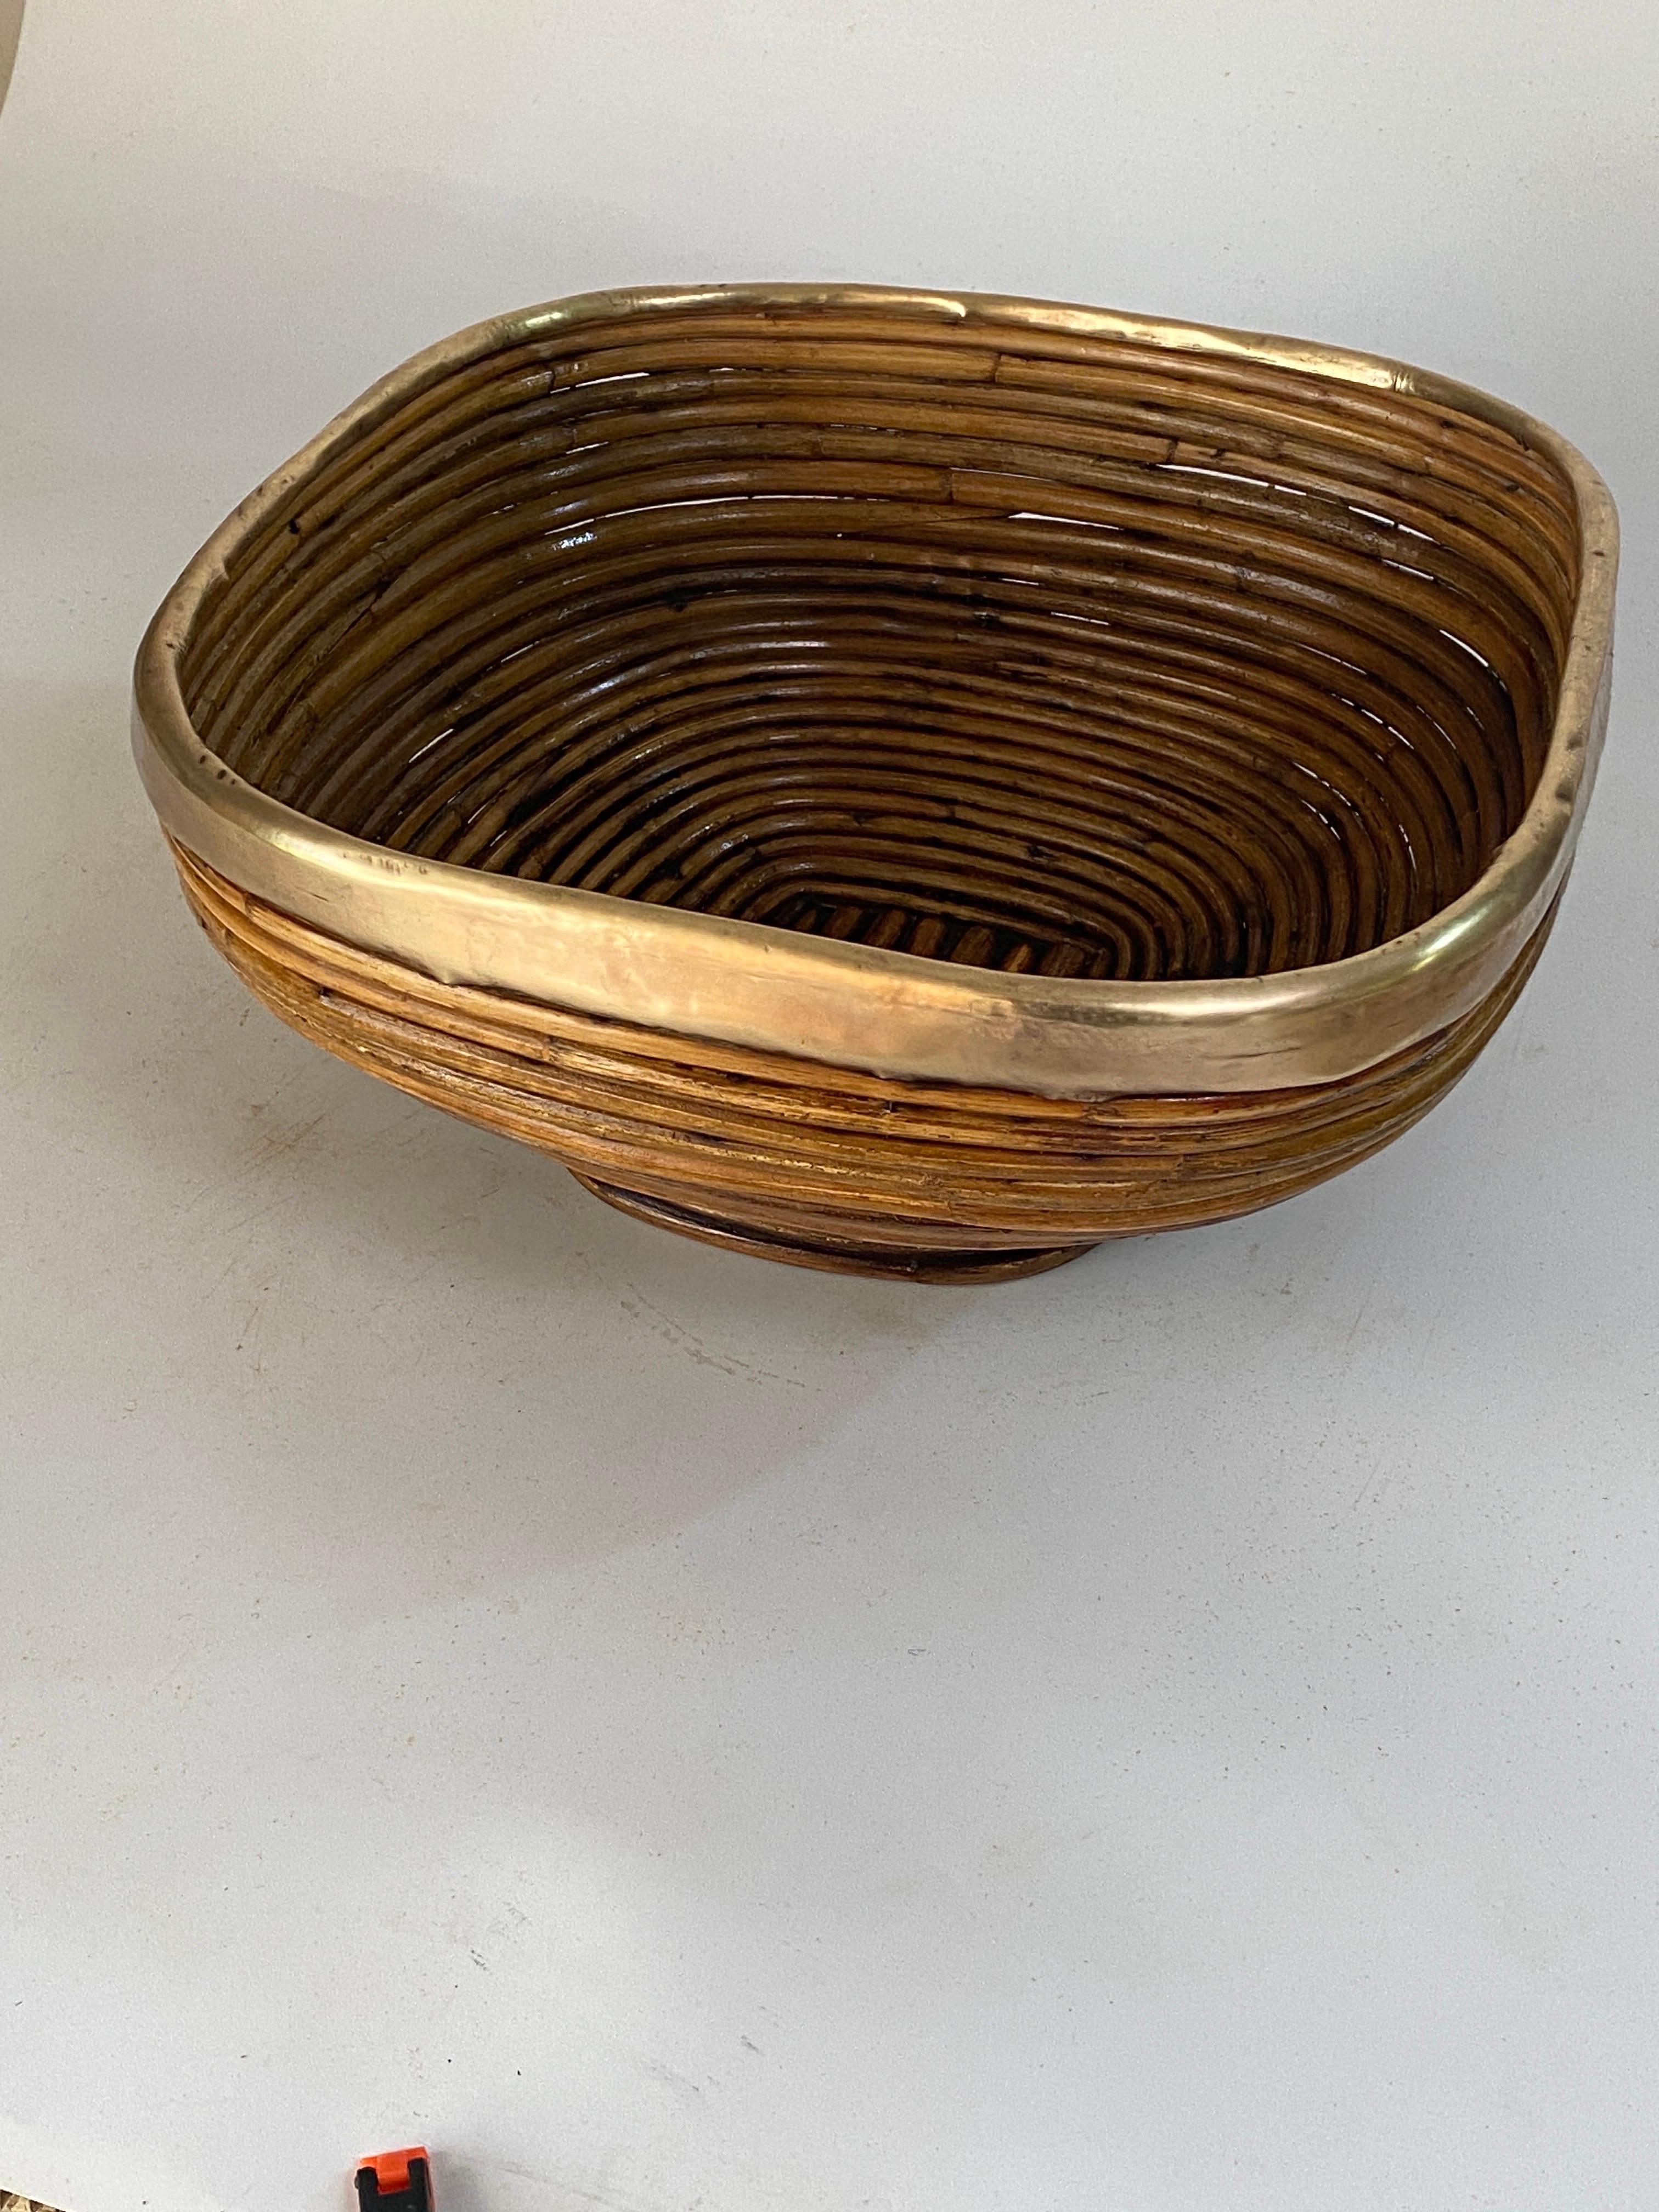 Rattan and Brass Italian Large Basket Bowl Centerpiece, 1970s Crespi Style For Sale 11